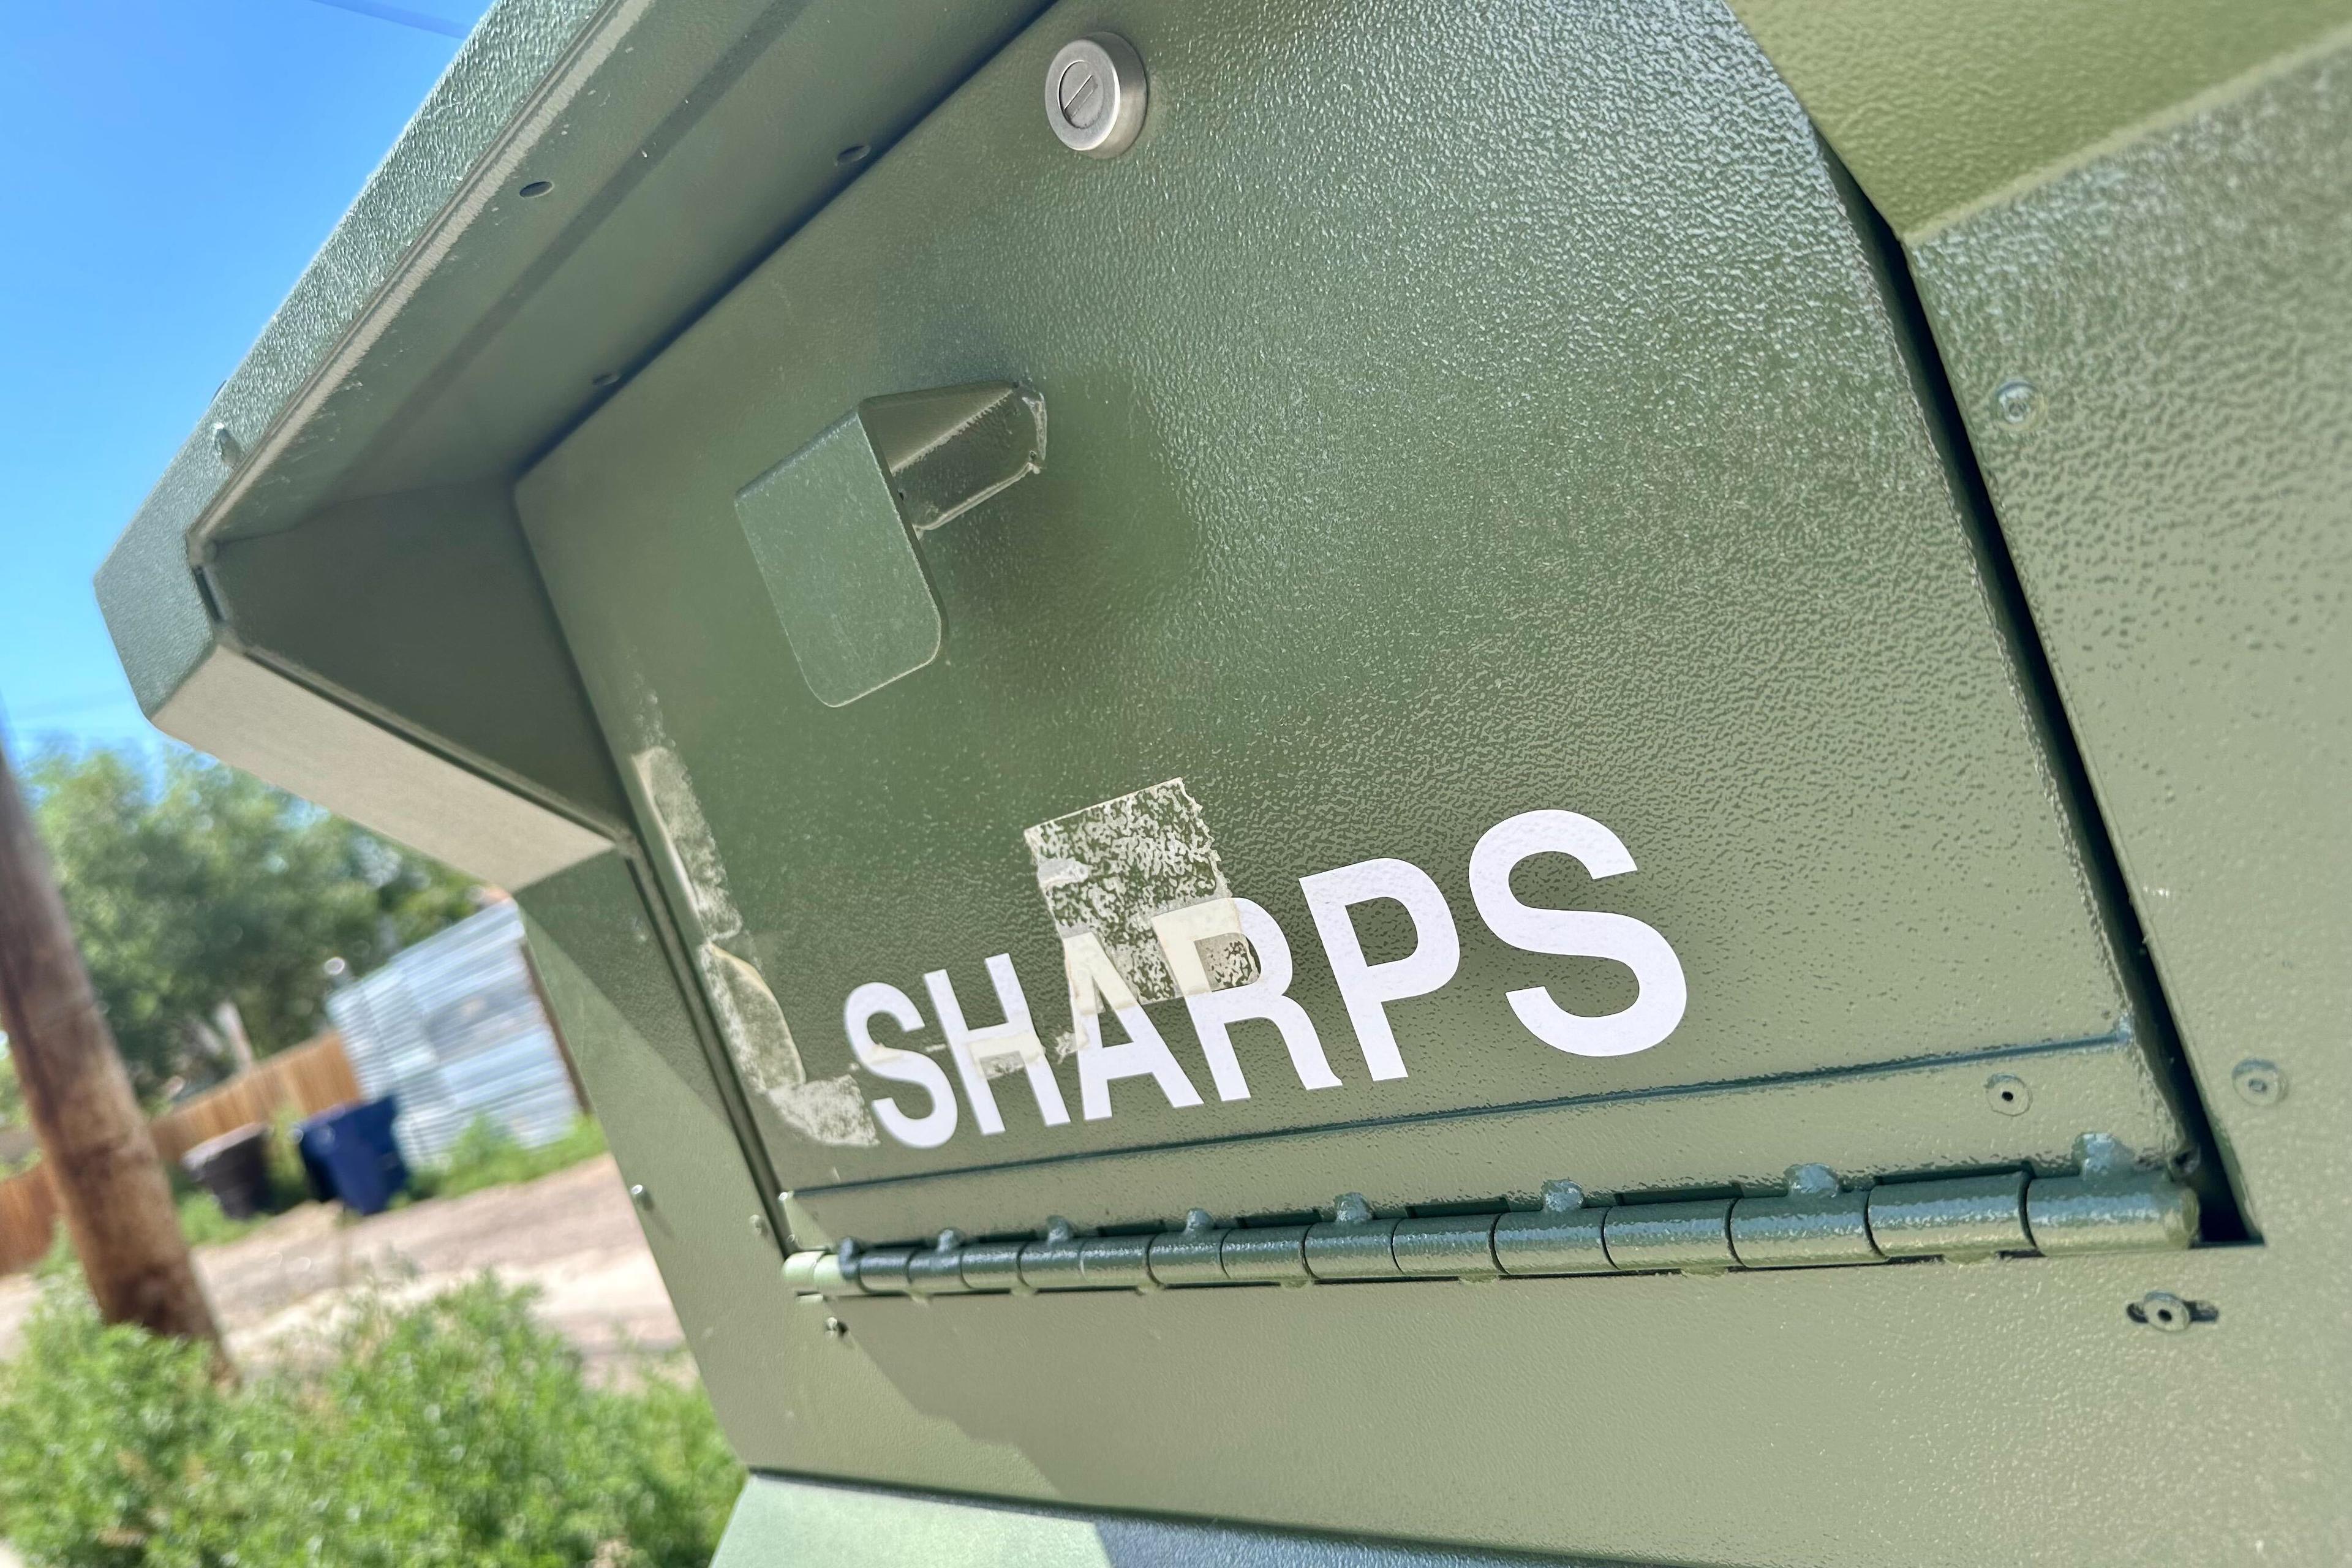 The door of a green metal sharps container box is shown under the midday sun.